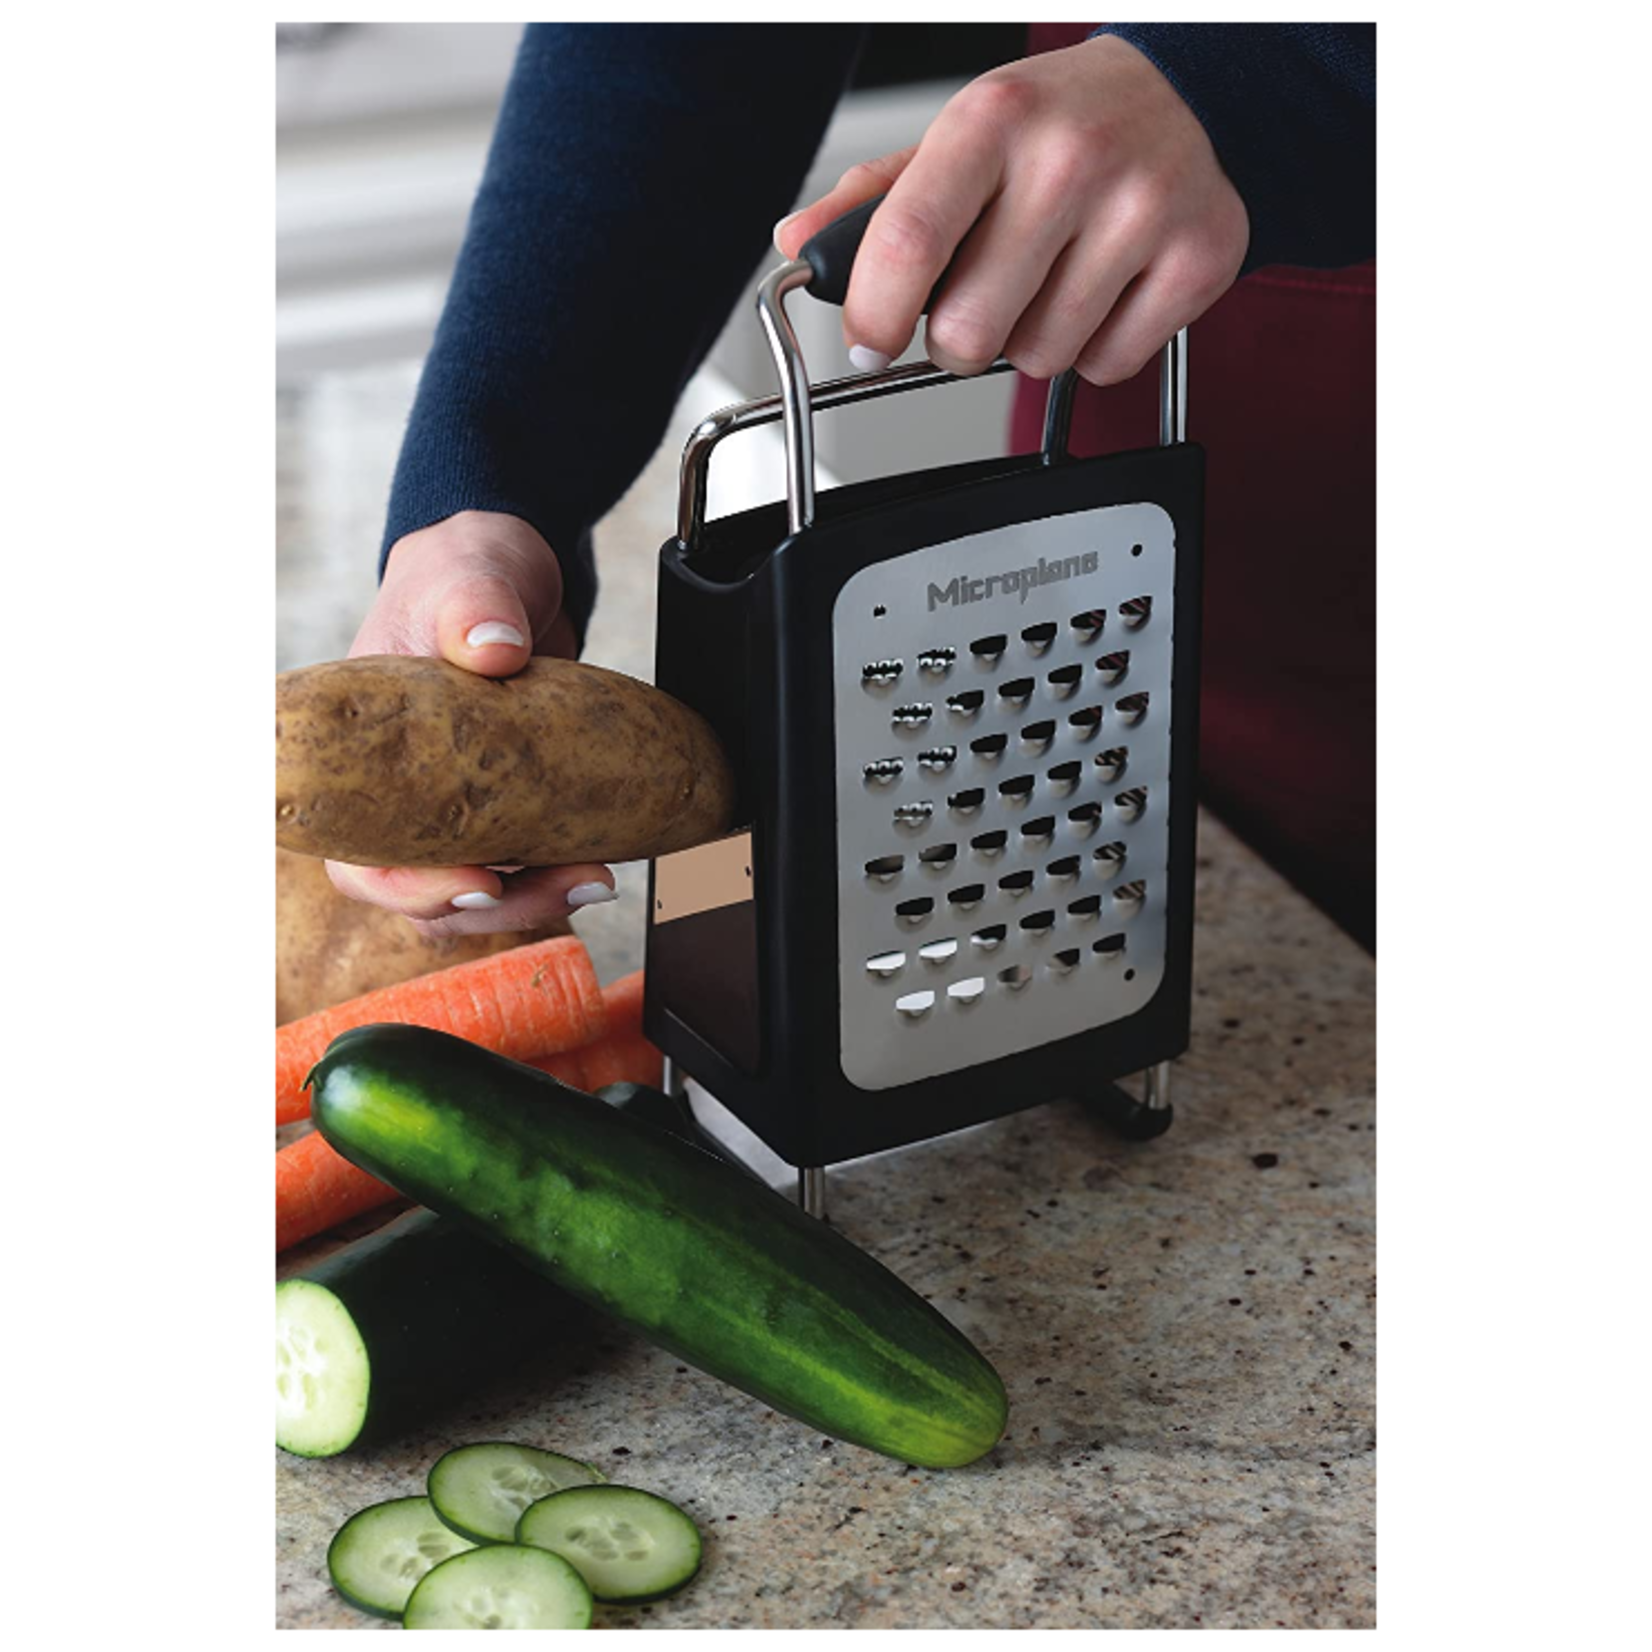 Microplane 4-sided Box Grater, black